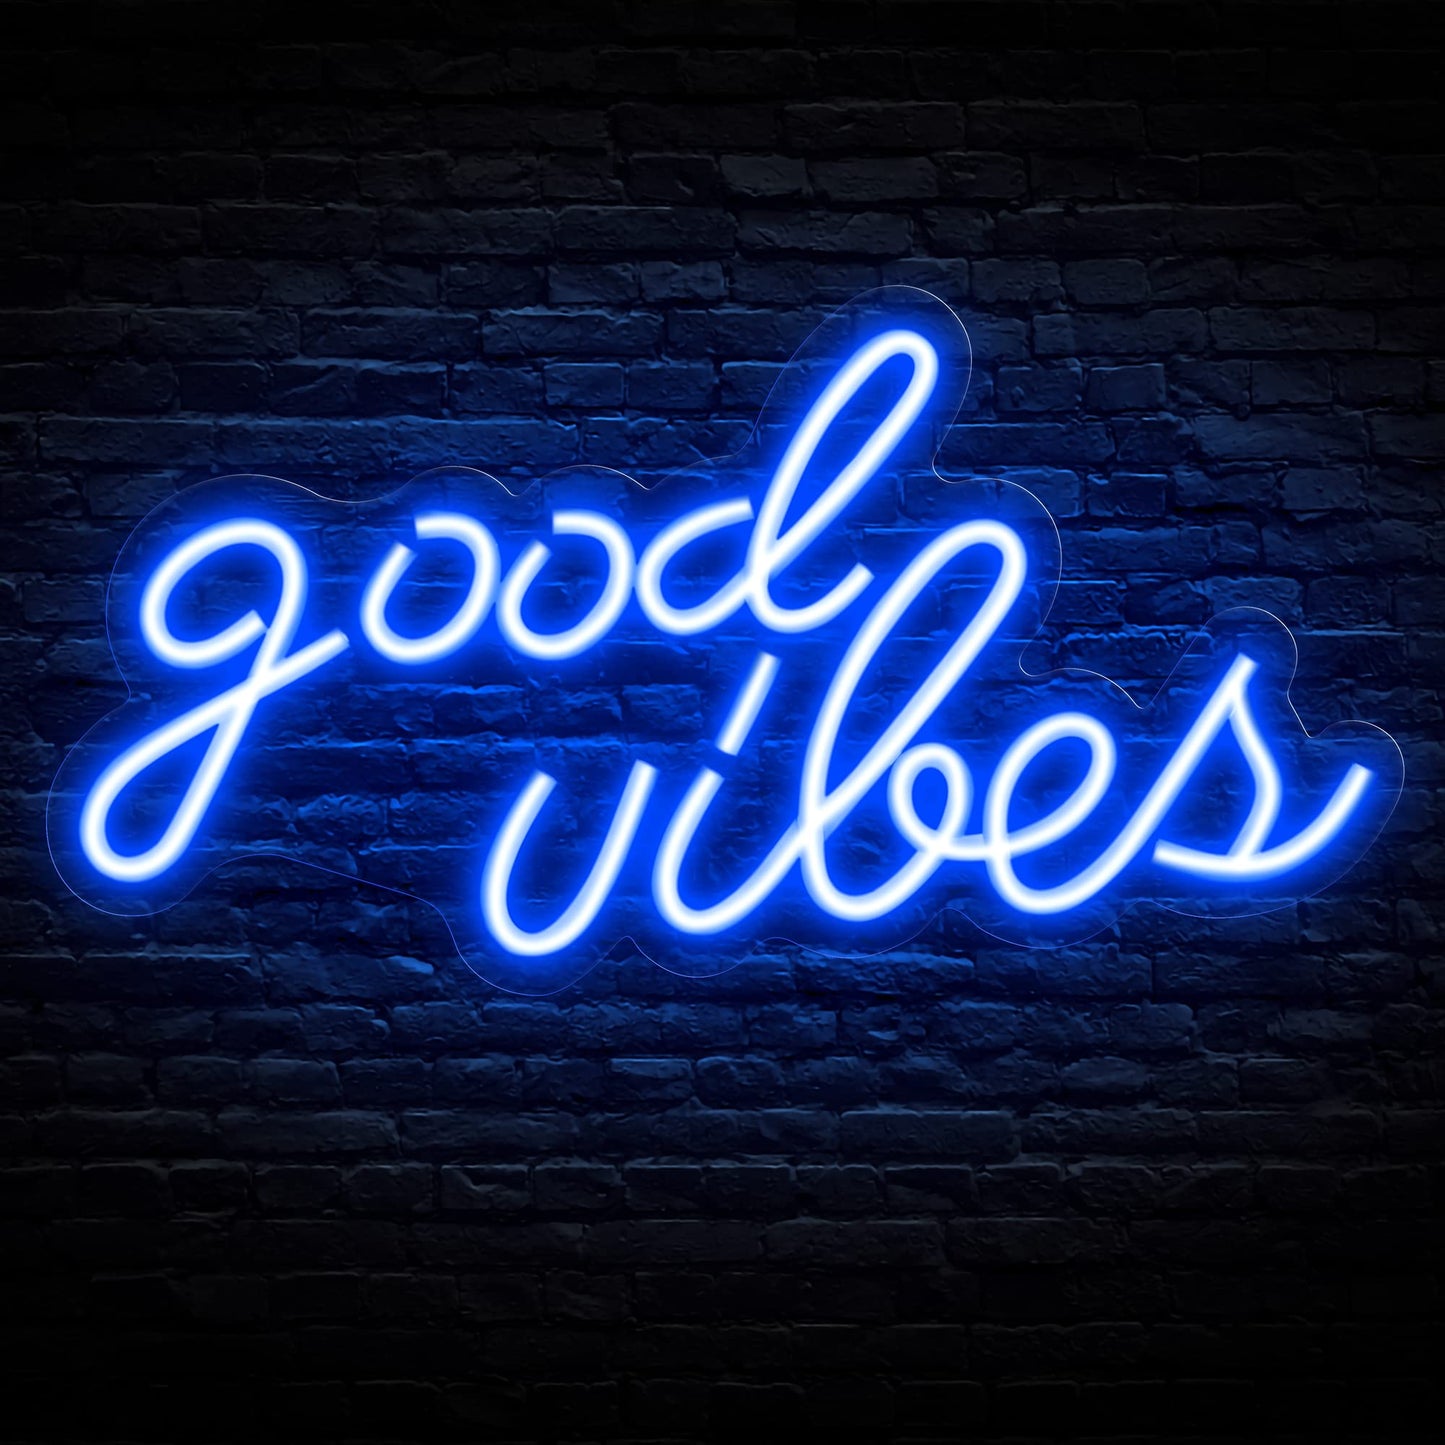 Good Vibes Neon Sign for Wall Decor (16.1 x 8.3 inch)